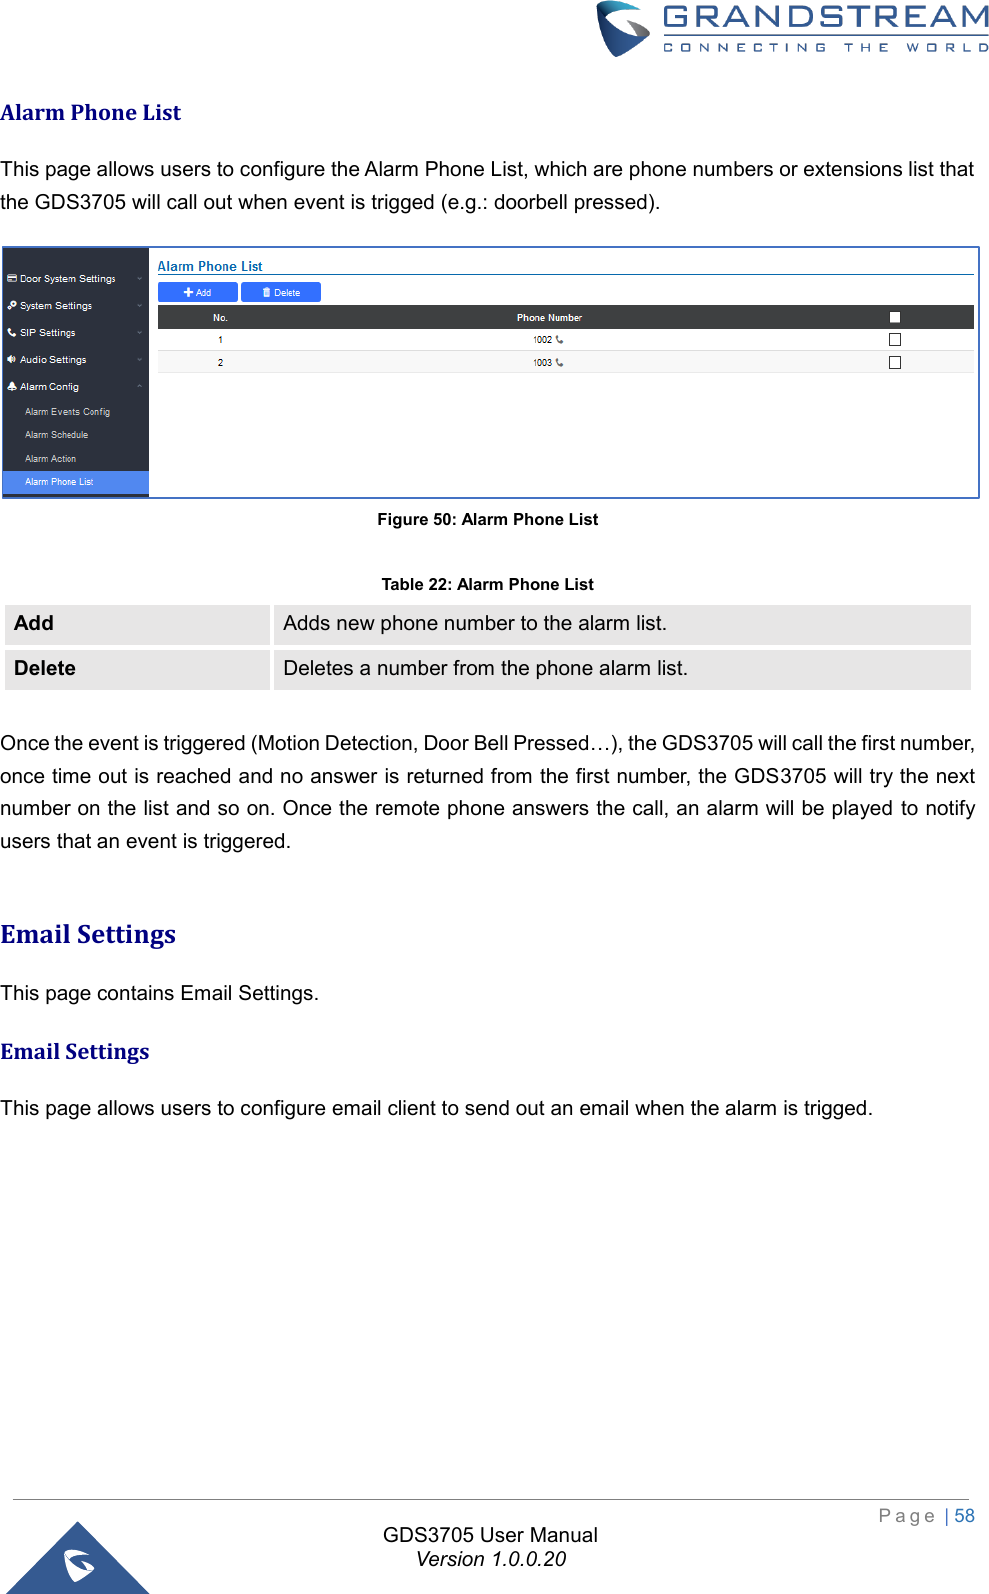                                                                         P a g e  | 58  GDS3705 User Manual Version 1.0.0.20 Alarm Phone List This page allows users to configure the Alarm Phone List, which are phone numbers or extensions list that the GDS3705 will call out when event is trigged (e.g.: doorbell pressed).  Figure 50: Alarm Phone List  Table 22: Alarm Phone List Add Adds new phone number to the alarm list. Delete Deletes a number from the phone alarm list.  Once the event is triggered (Motion Detection, Door Bell Pressed…), the GDS3705 will call the first number, once time out is reached and no answer is returned from the first number, the GDS3705 will try the next number on the list and so on. Once the remote phone answers the call, an alarm will be played to notify users that an event is triggered.  Email Settings This page contains Email Settings. Email Settings This page allows users to configure email client to send out an email when the alarm is trigged. 